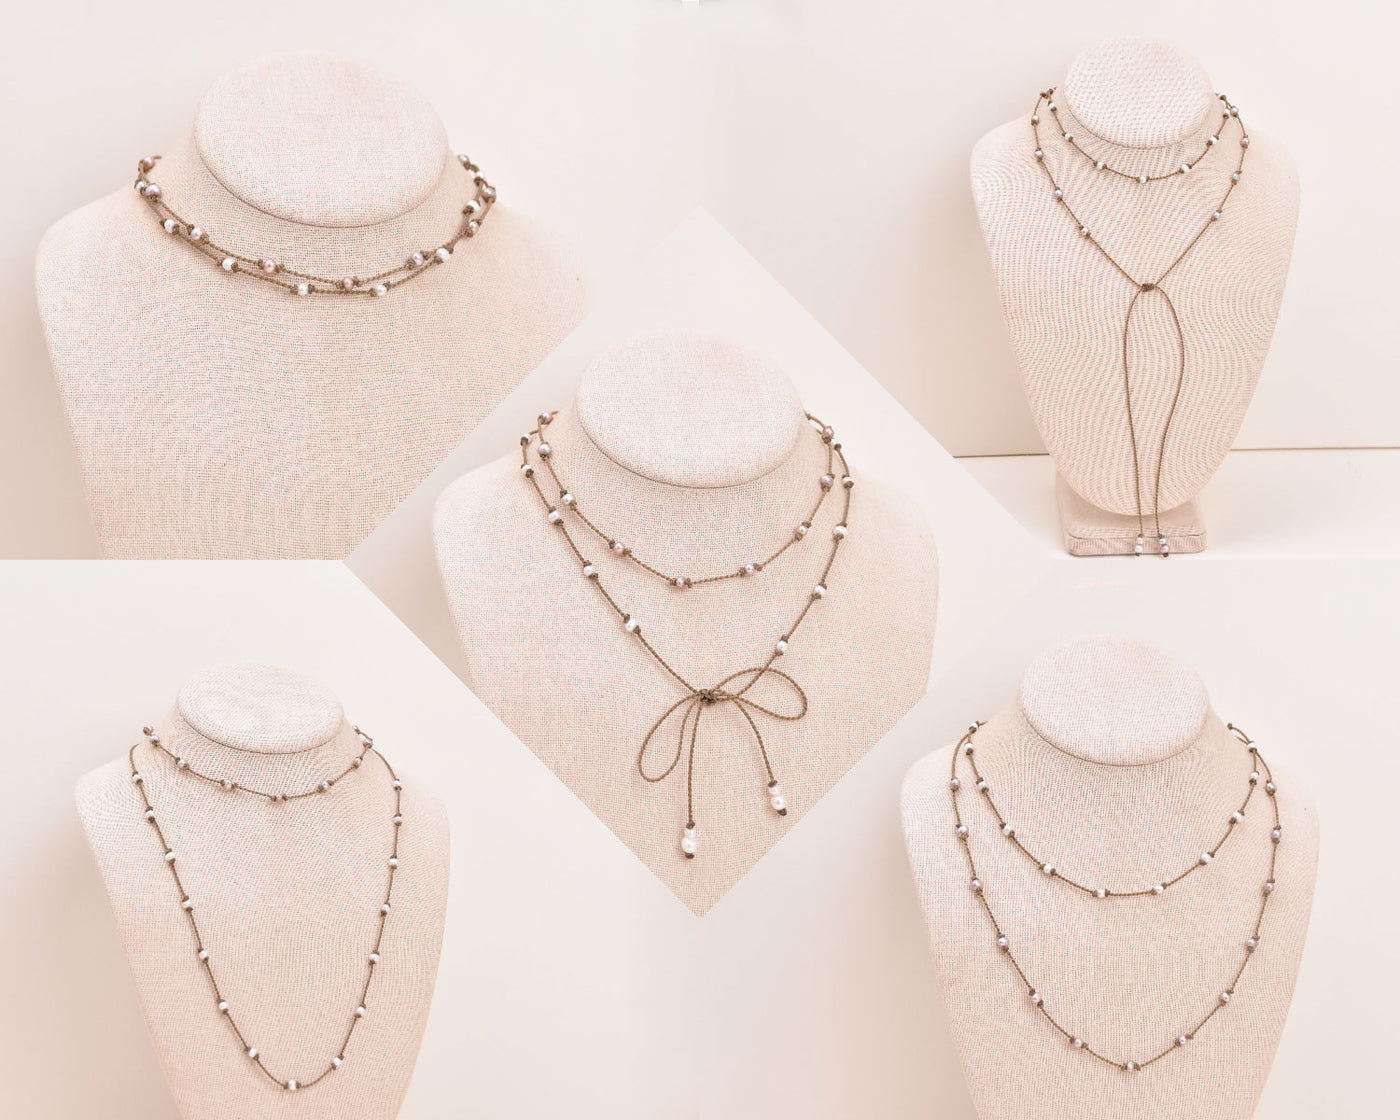 Double Dare - Necklace Stack (10% off)